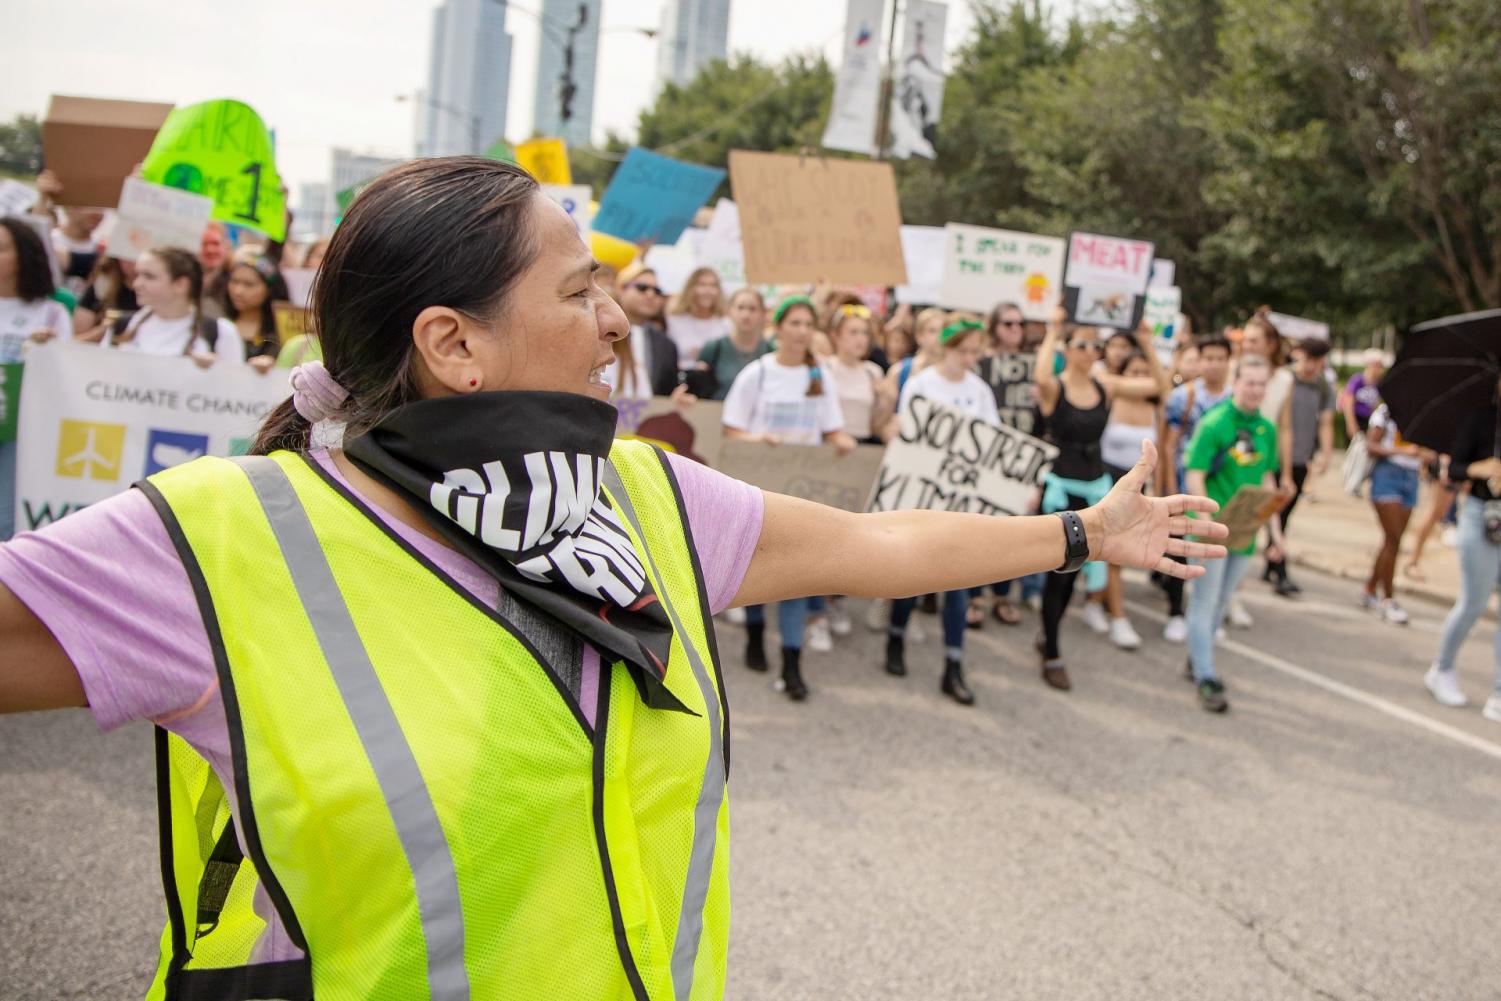 Chicago+youth+combat+climate+crisis